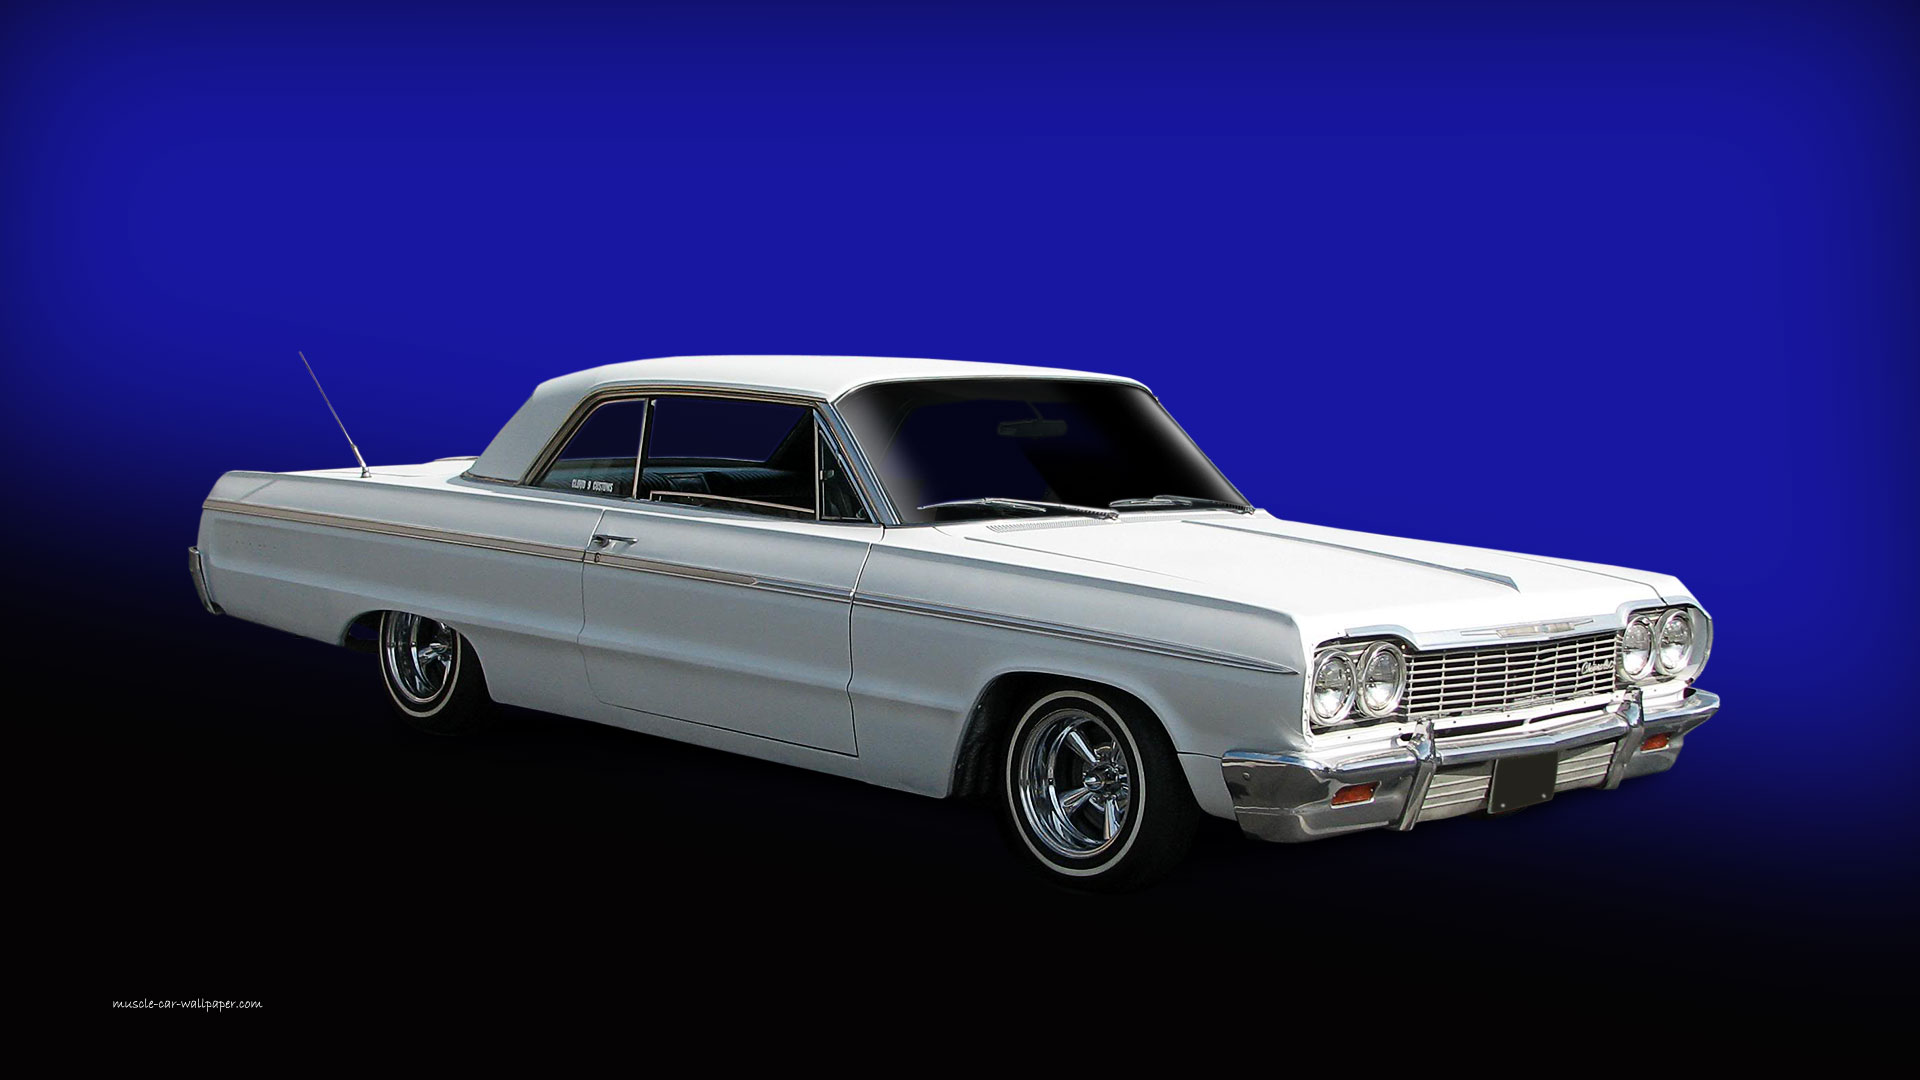 Download Lowrider Creamcolored 1964 Impala Wallpaper  Wallpaperscom